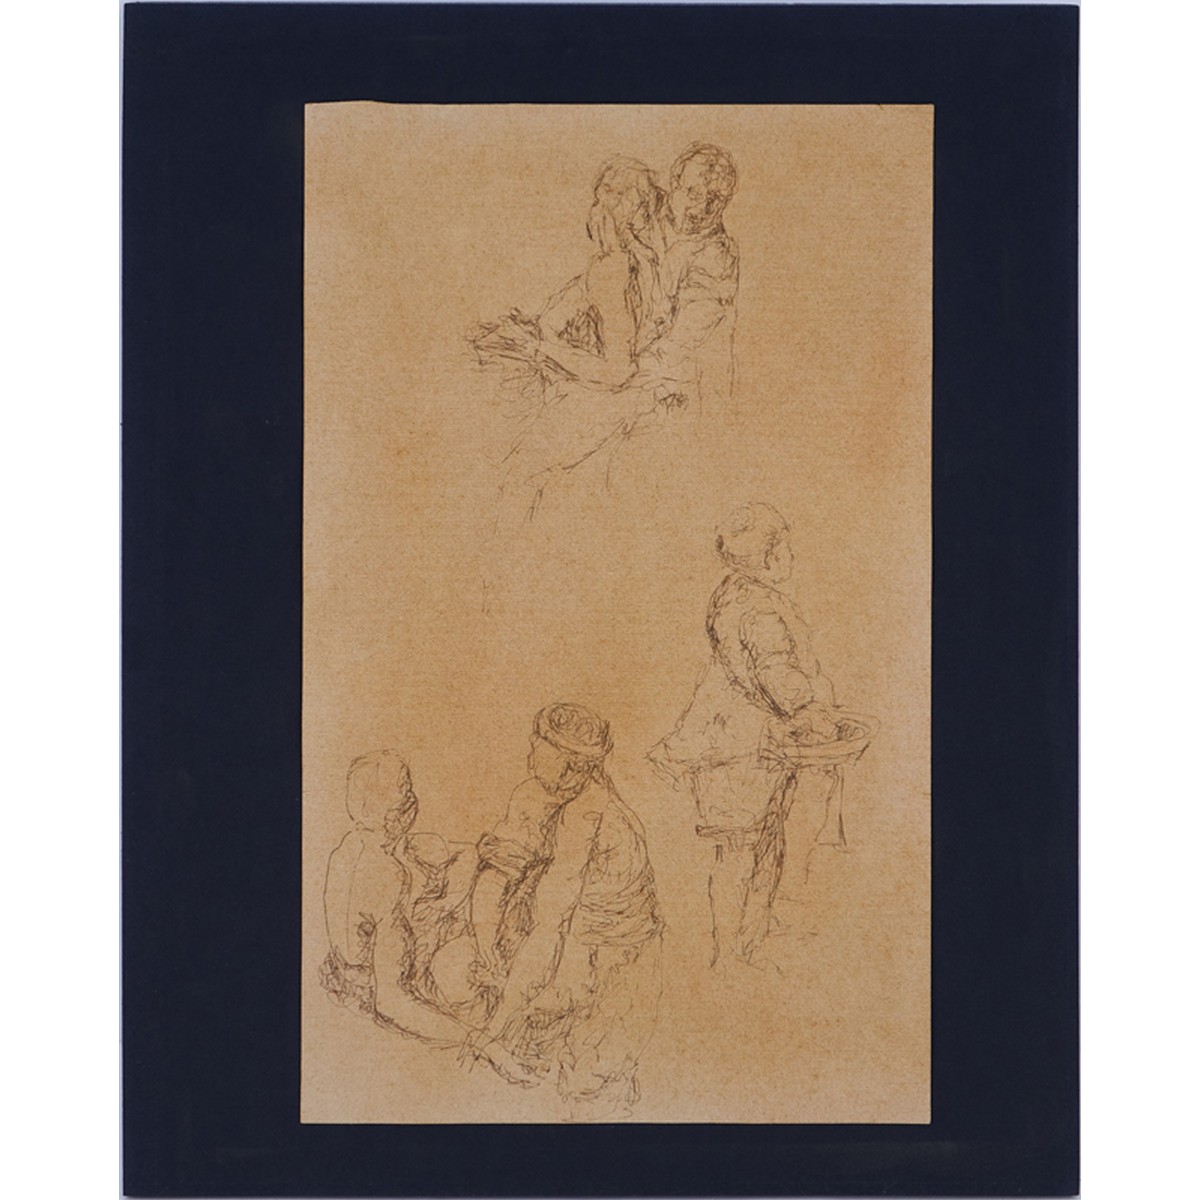 18/19th Century Old Master Drawing In Ink On Brown Paper "Study Of Six Figures". Unsigned.